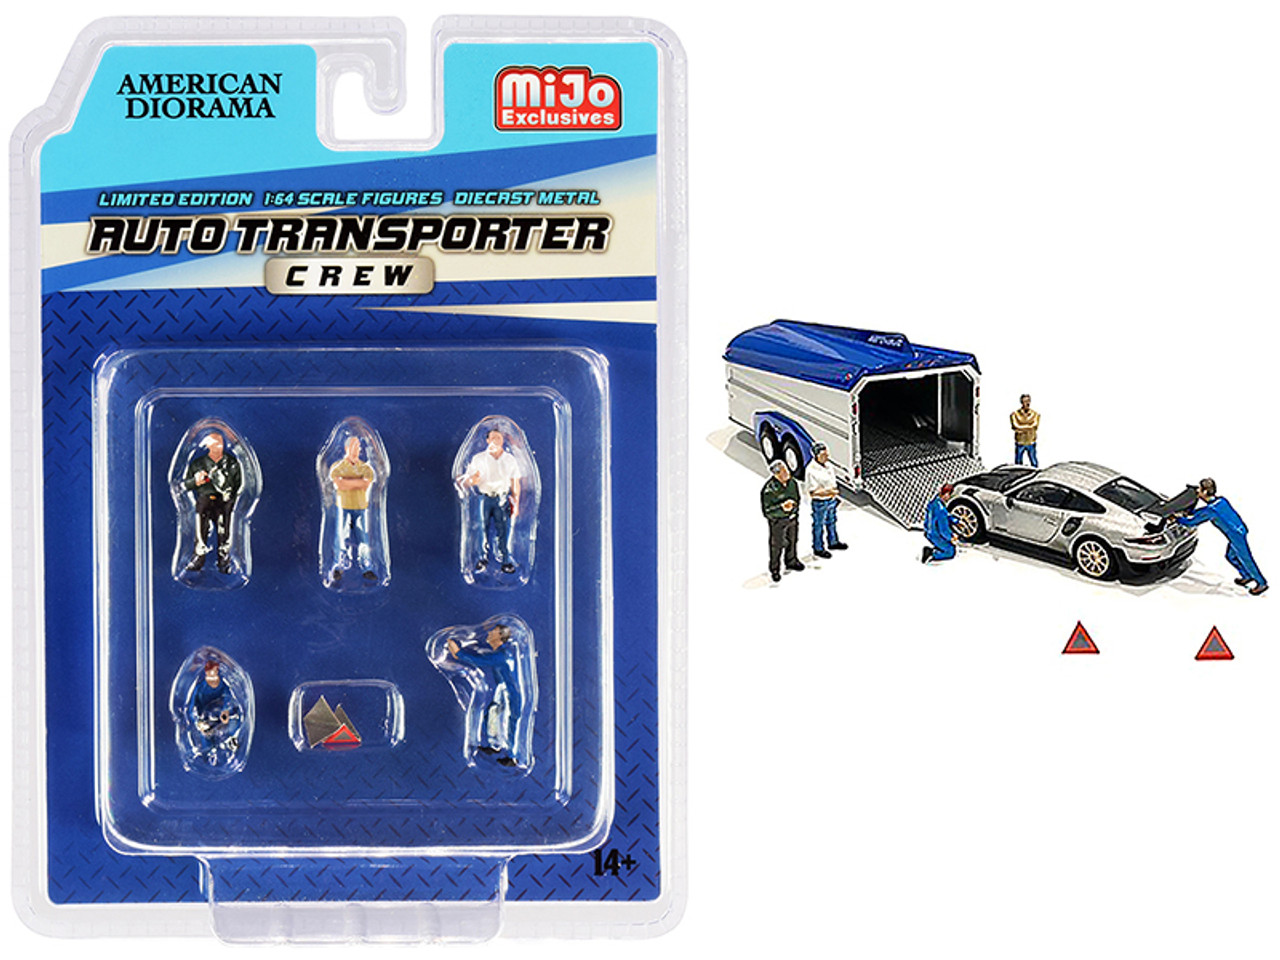 1/64 American Diorama "Auto Transporter Crew" Diecast Set of 7 pieces (5 Figurines and 2 Warning Triangles)